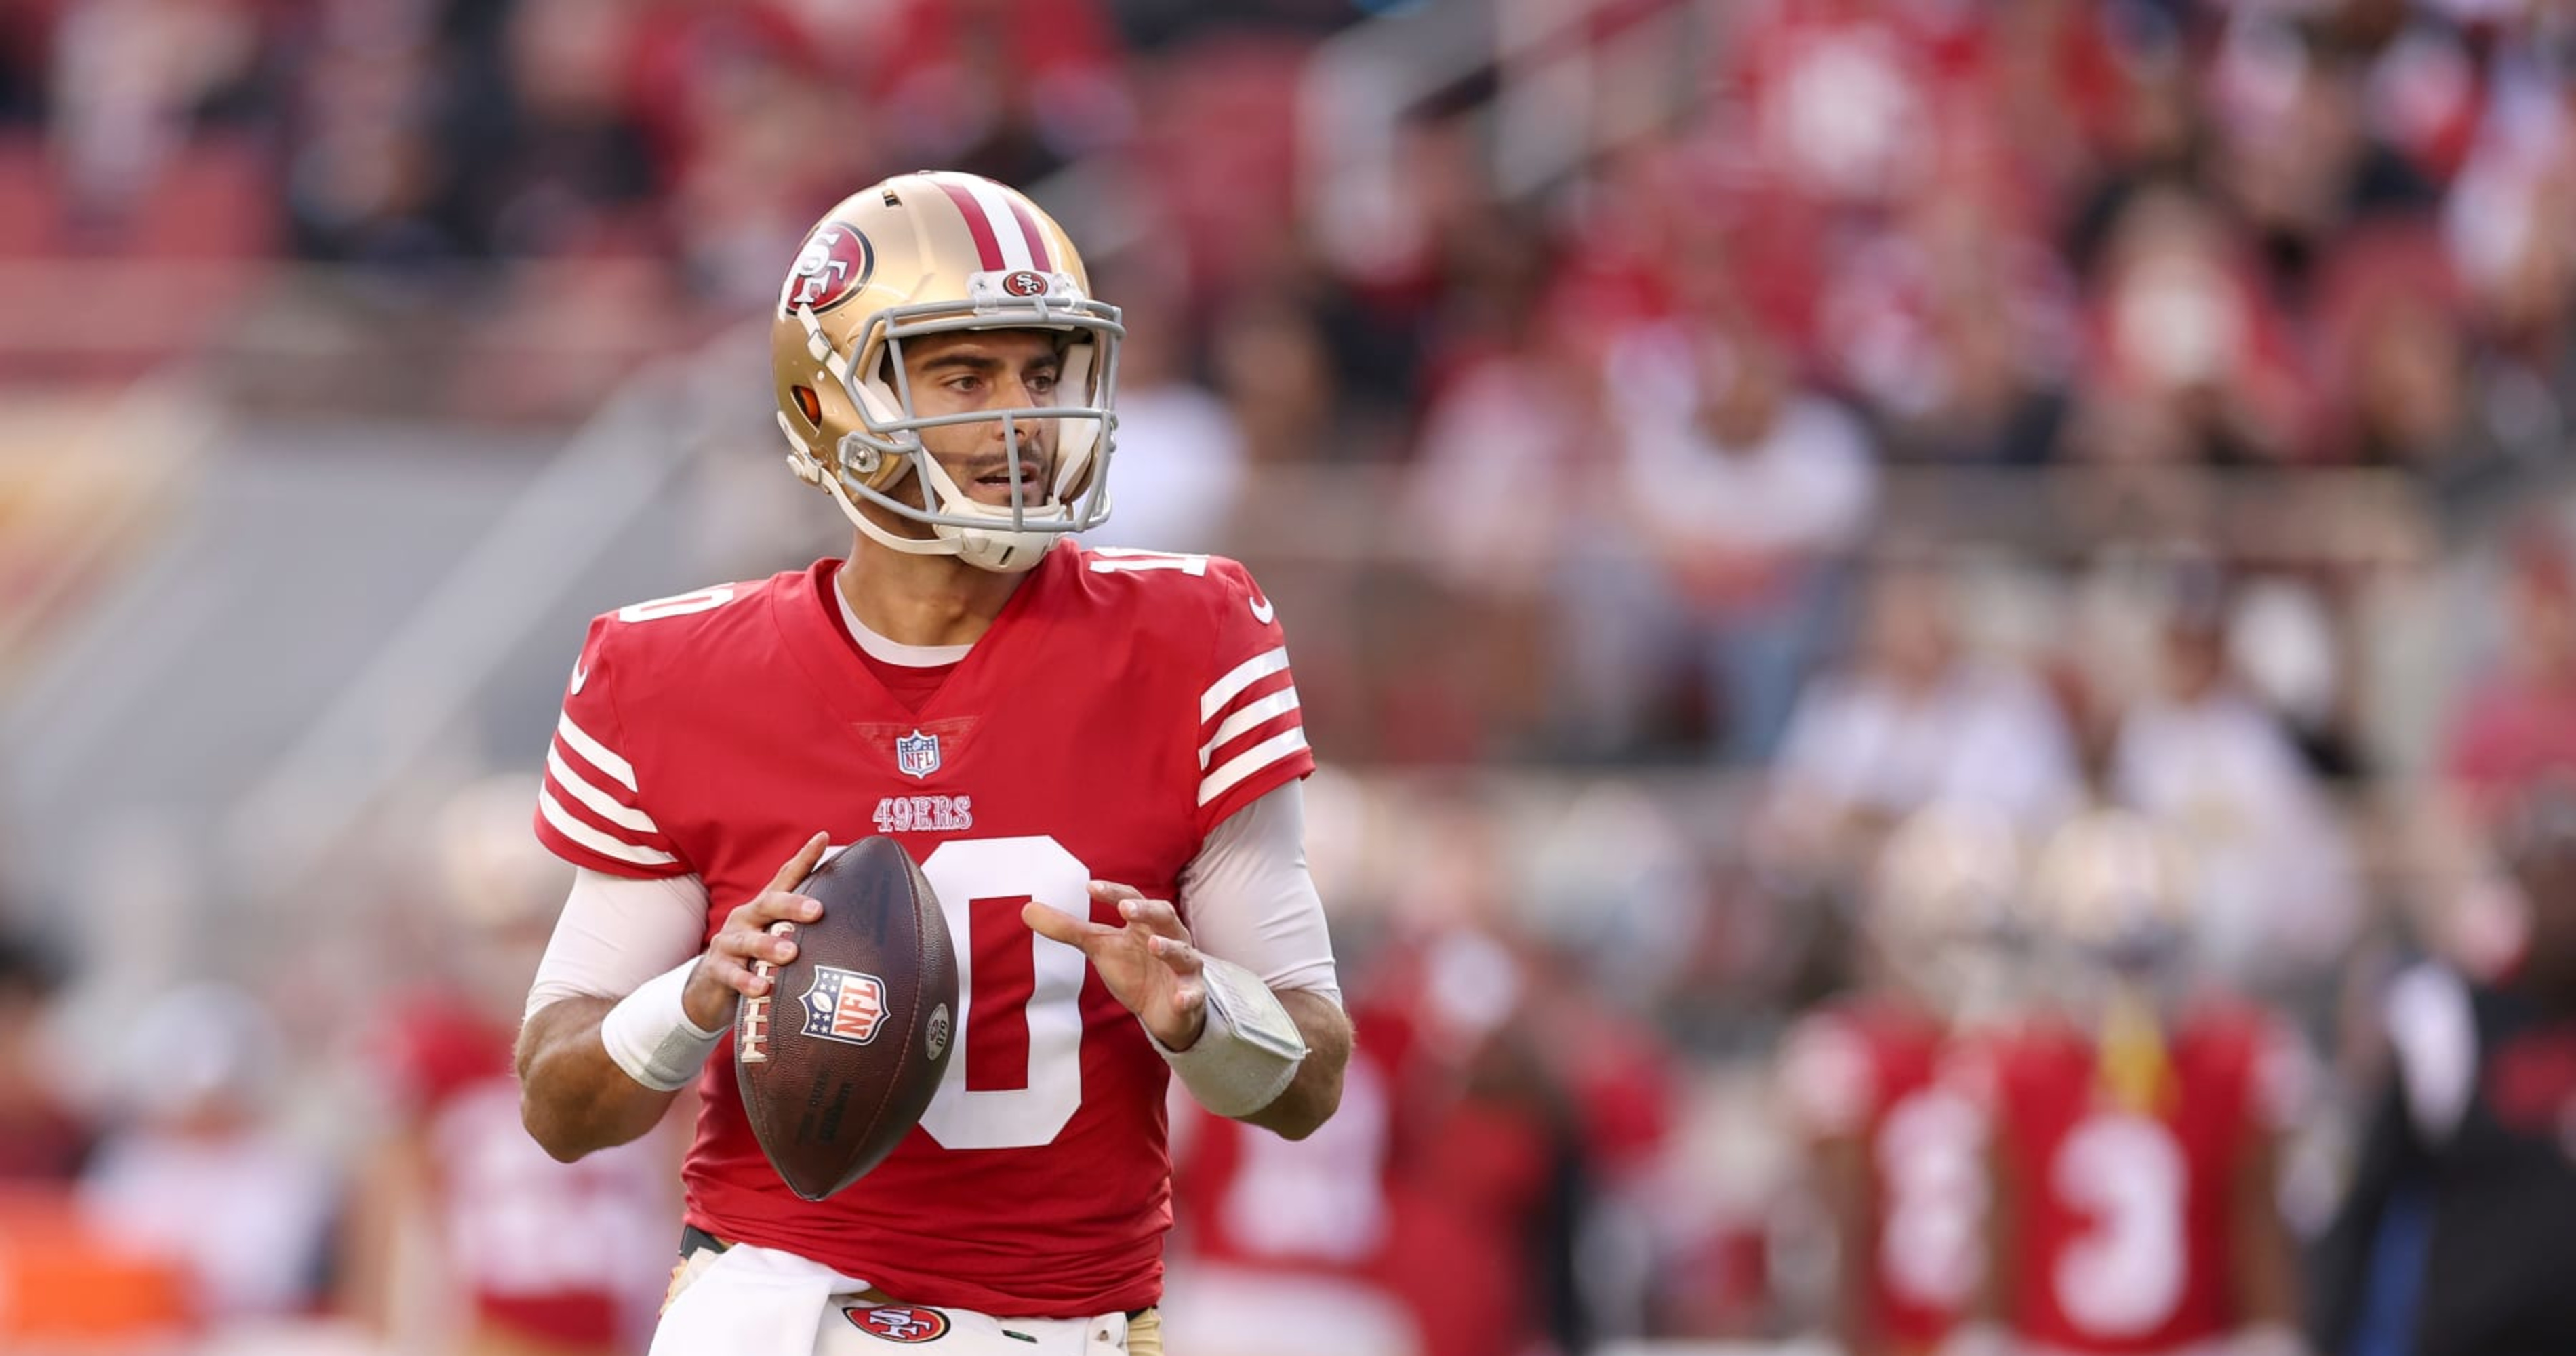 Jimmy Garoppolo leaves 49ers for Raiders in free agency, per report